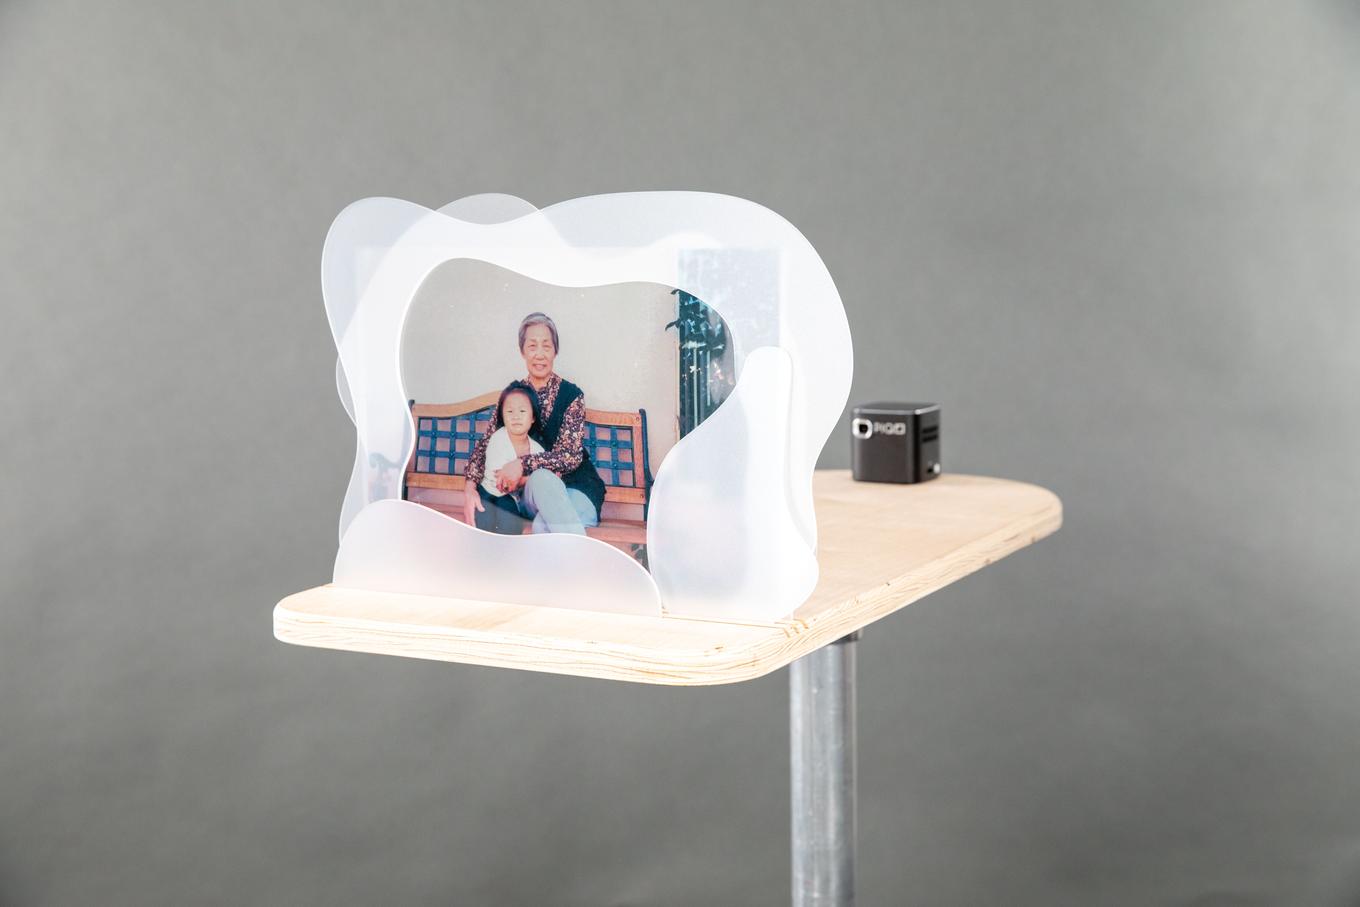 Image of a translucent photograph of grandmother and child, framed by organic acrylic shapes